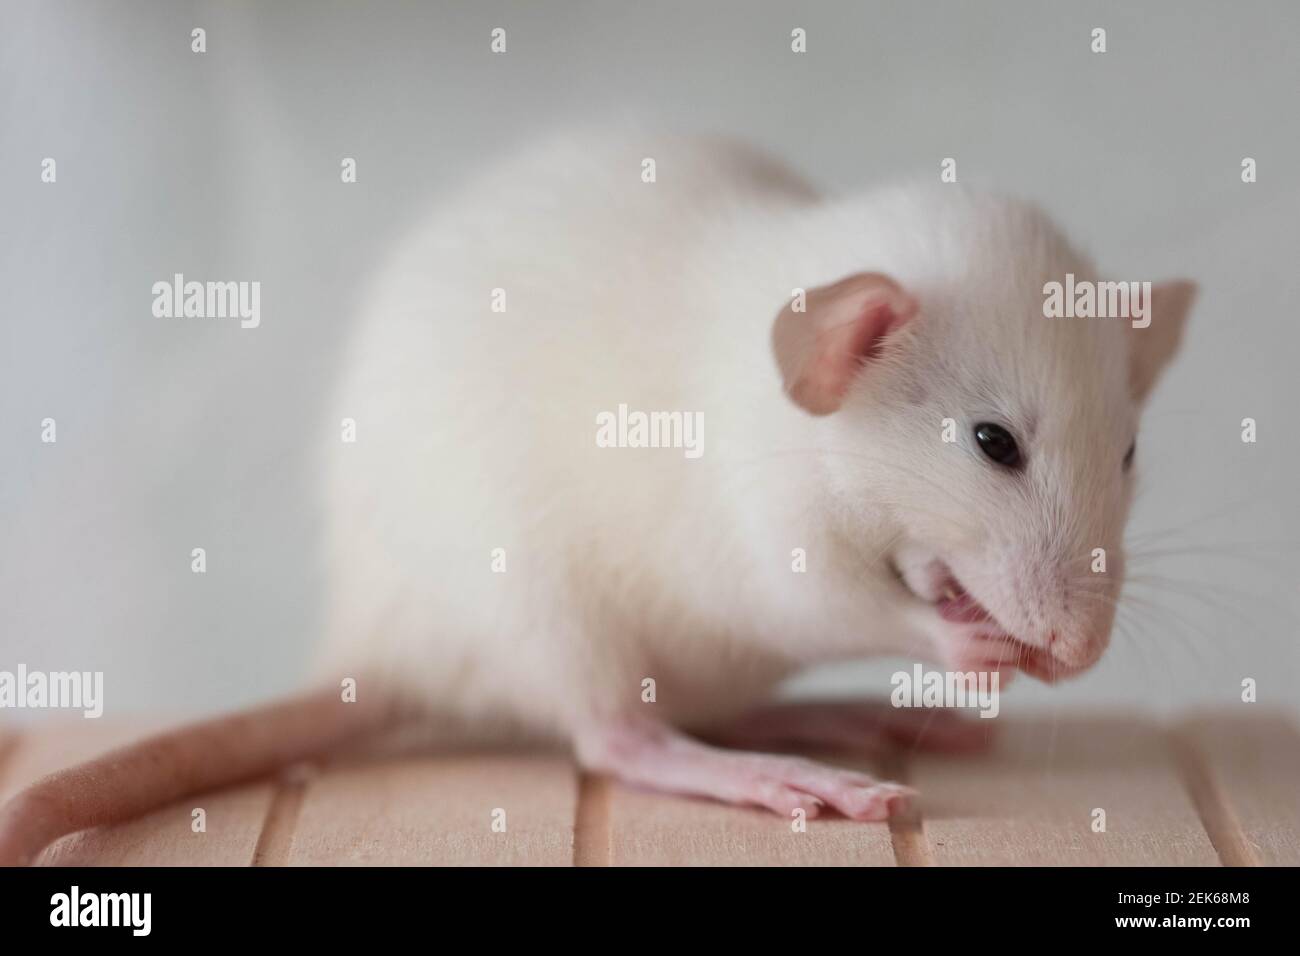 Rat close up. macro shooting. Cute muzzle with pink nose and long mustache. Stock Photo